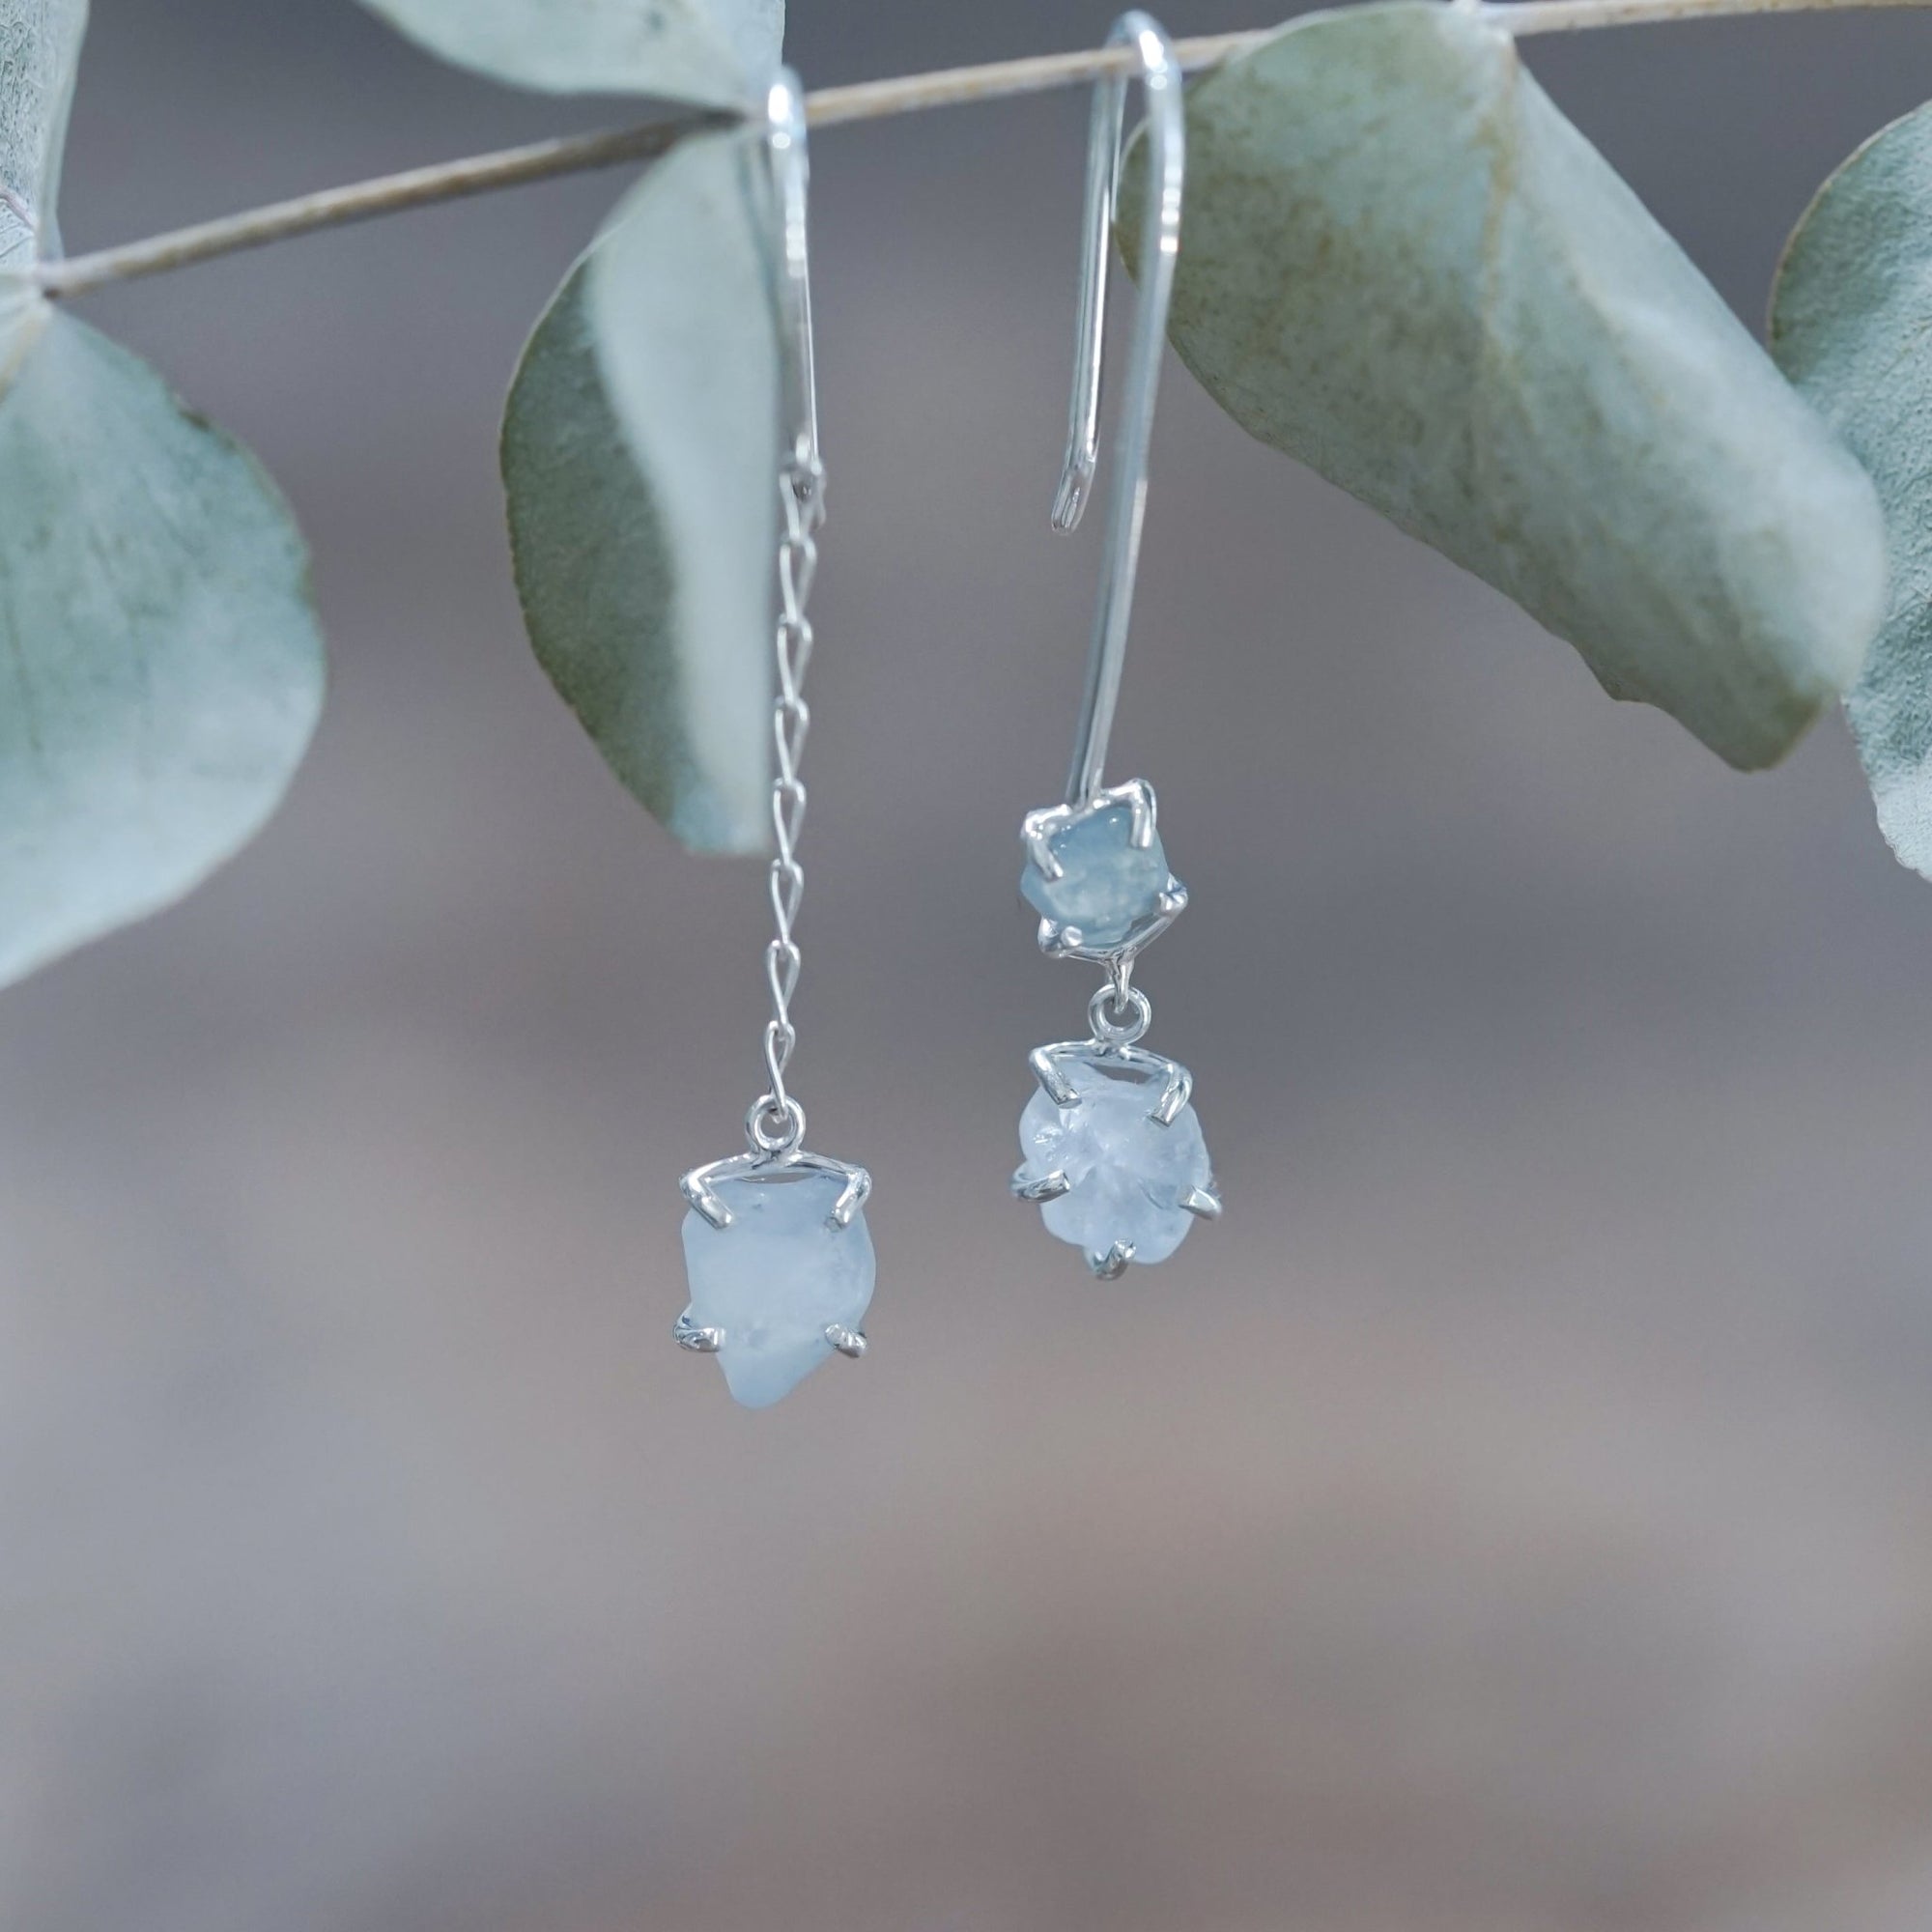 Mismatched Rough Sapphire Dangling Earrings - Gardens of the Sun | Ethical Jewelry